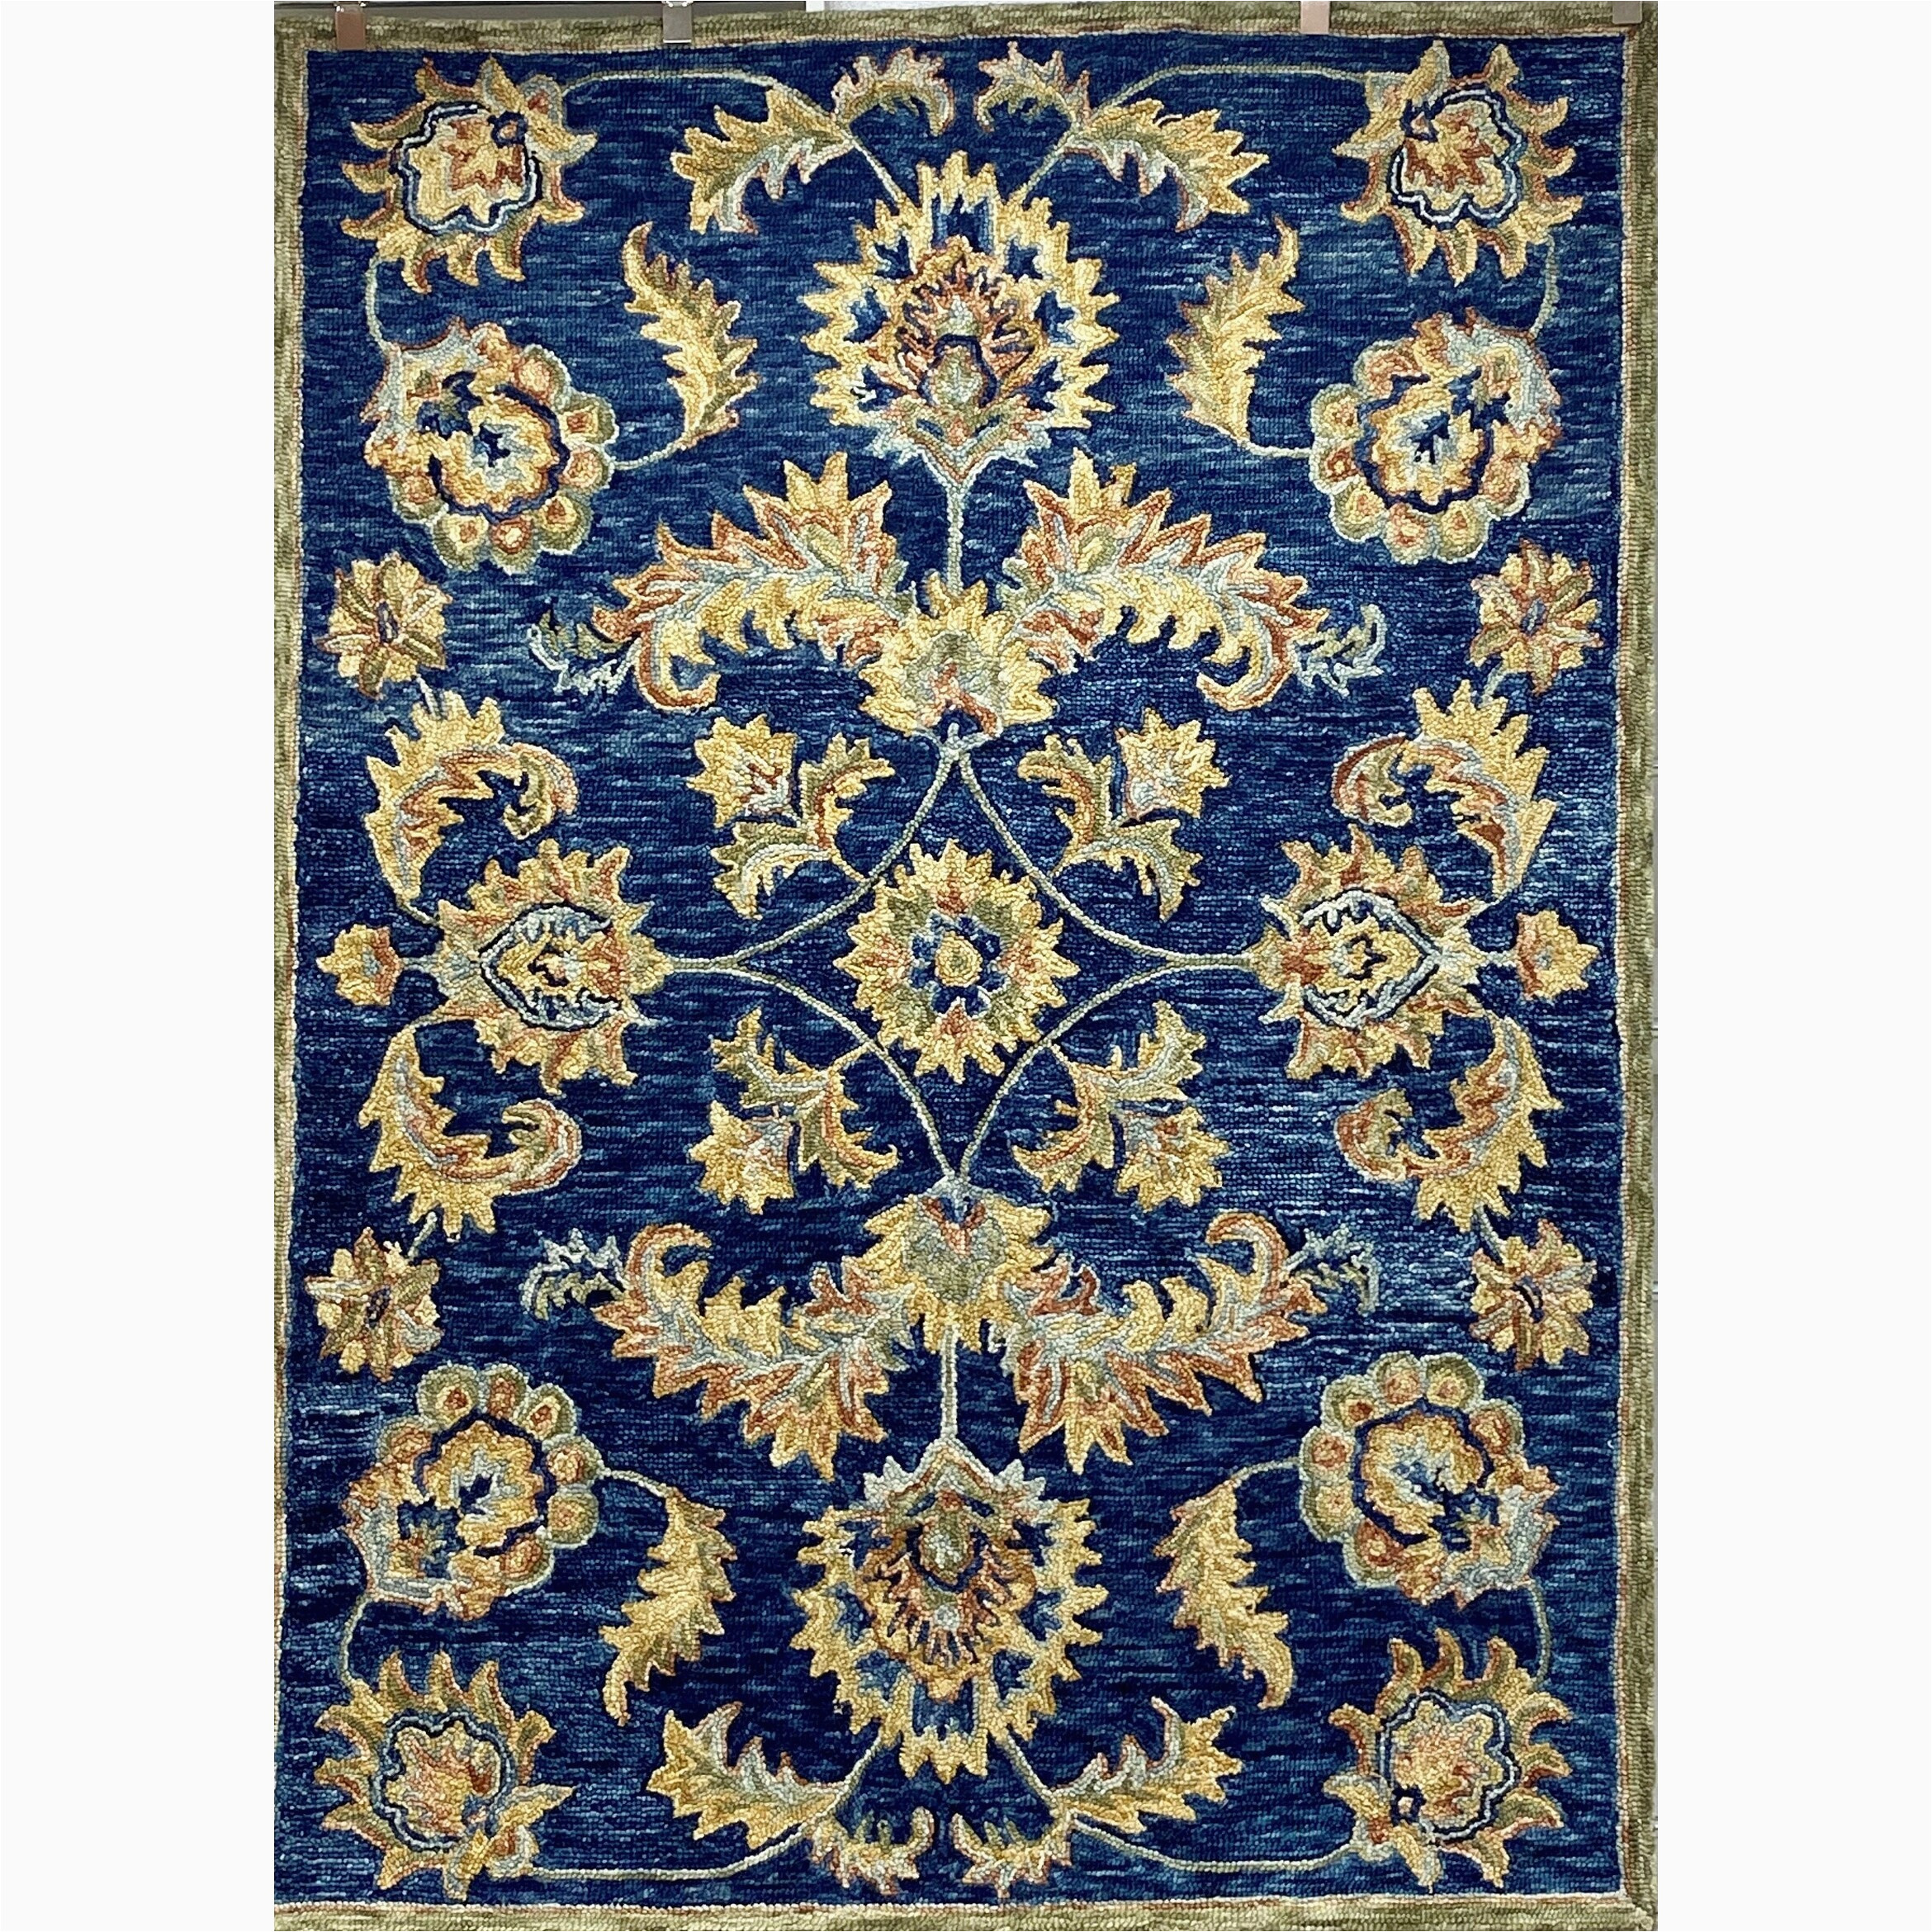 Royal Blue and Gold Rug Blue and Gold Royal Jacobean Rug – Overstock – 31297661